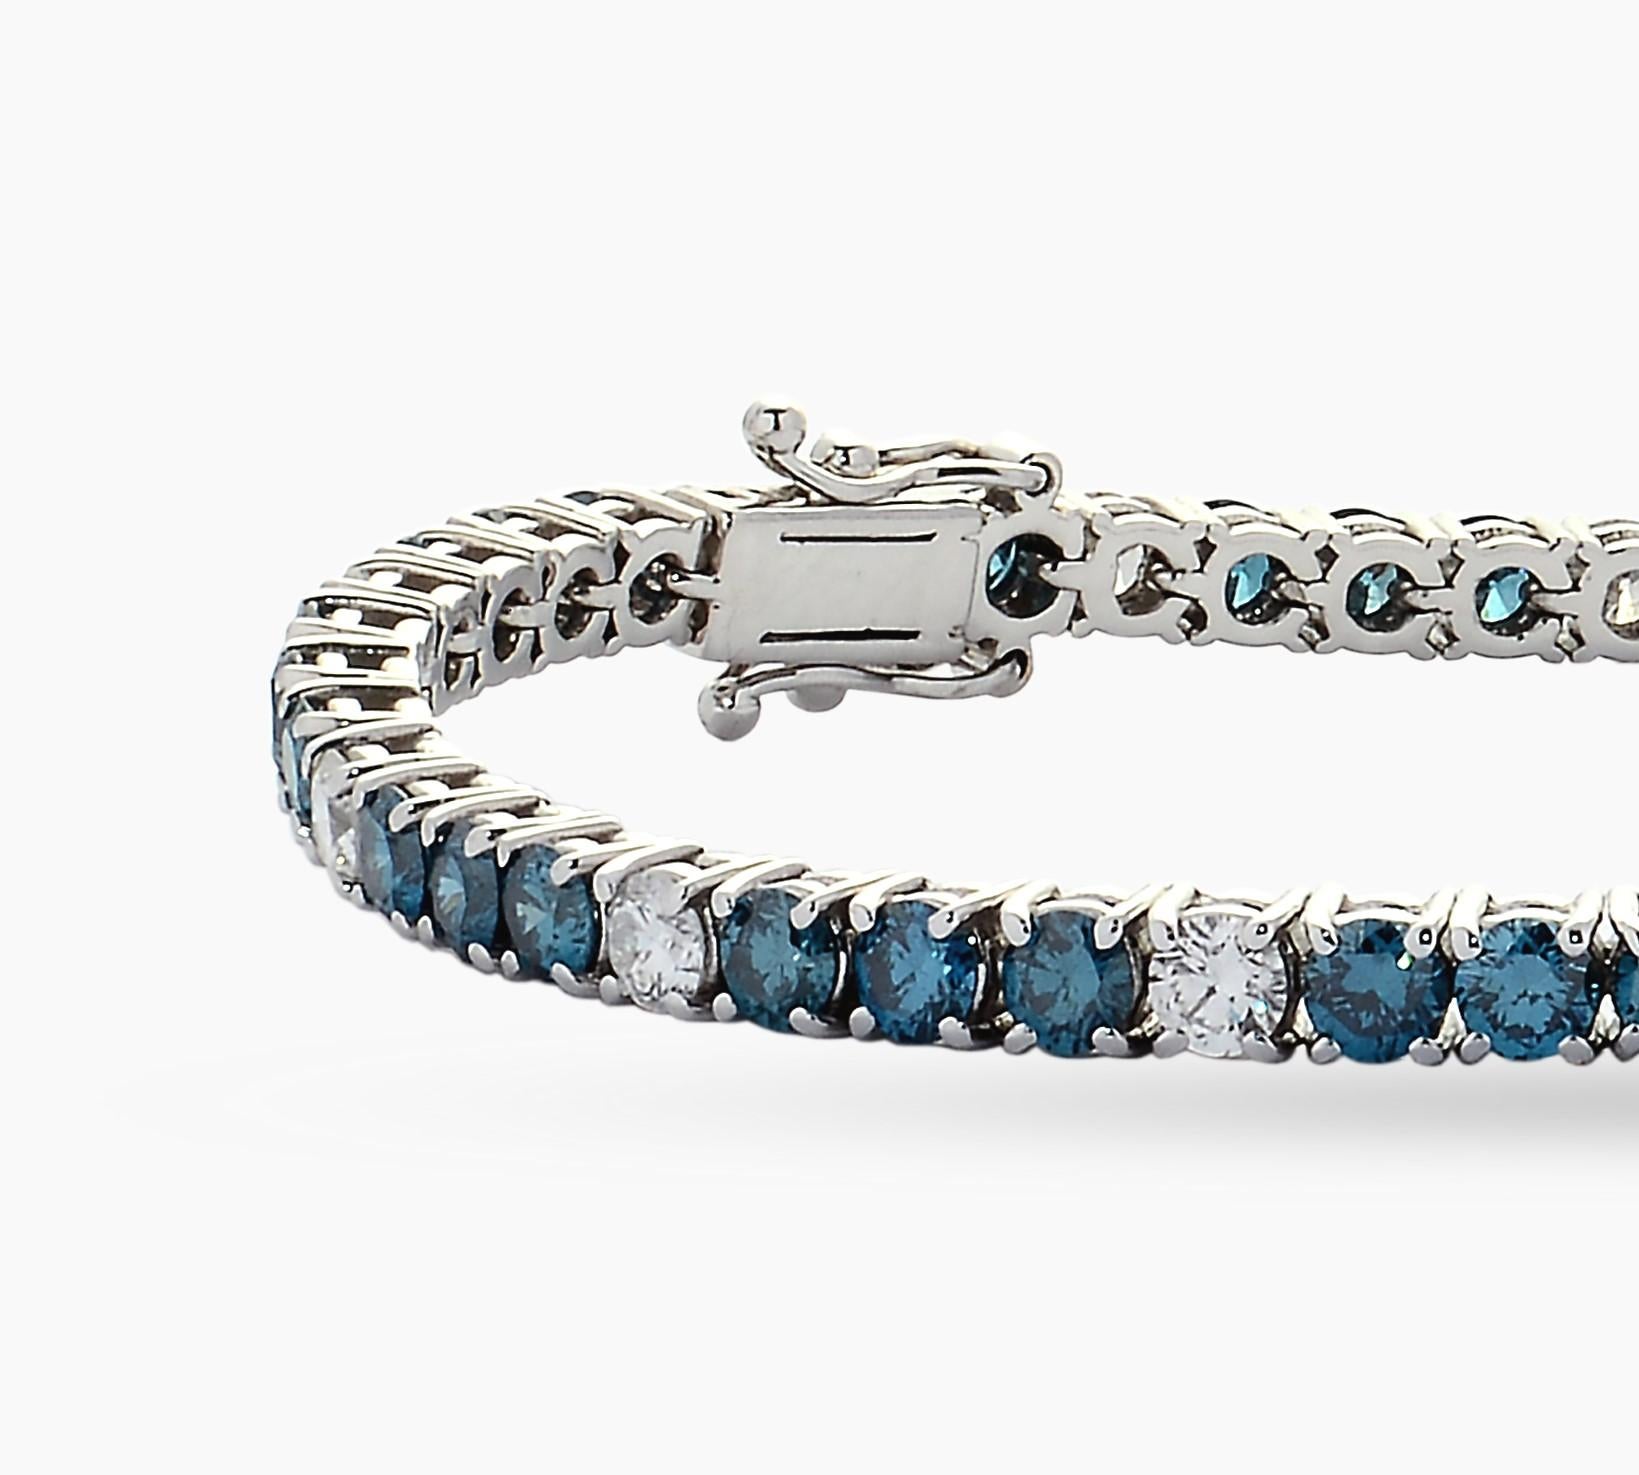 Stunning 18K white gold natural blue diamond tennis bracelet. This riviera bracelet is set with 42 natural blue brilliant cut diamonds and 15 natural white brilliant cut diamonds. This classic tennis bracelet is set with 4 prong settings for maximum